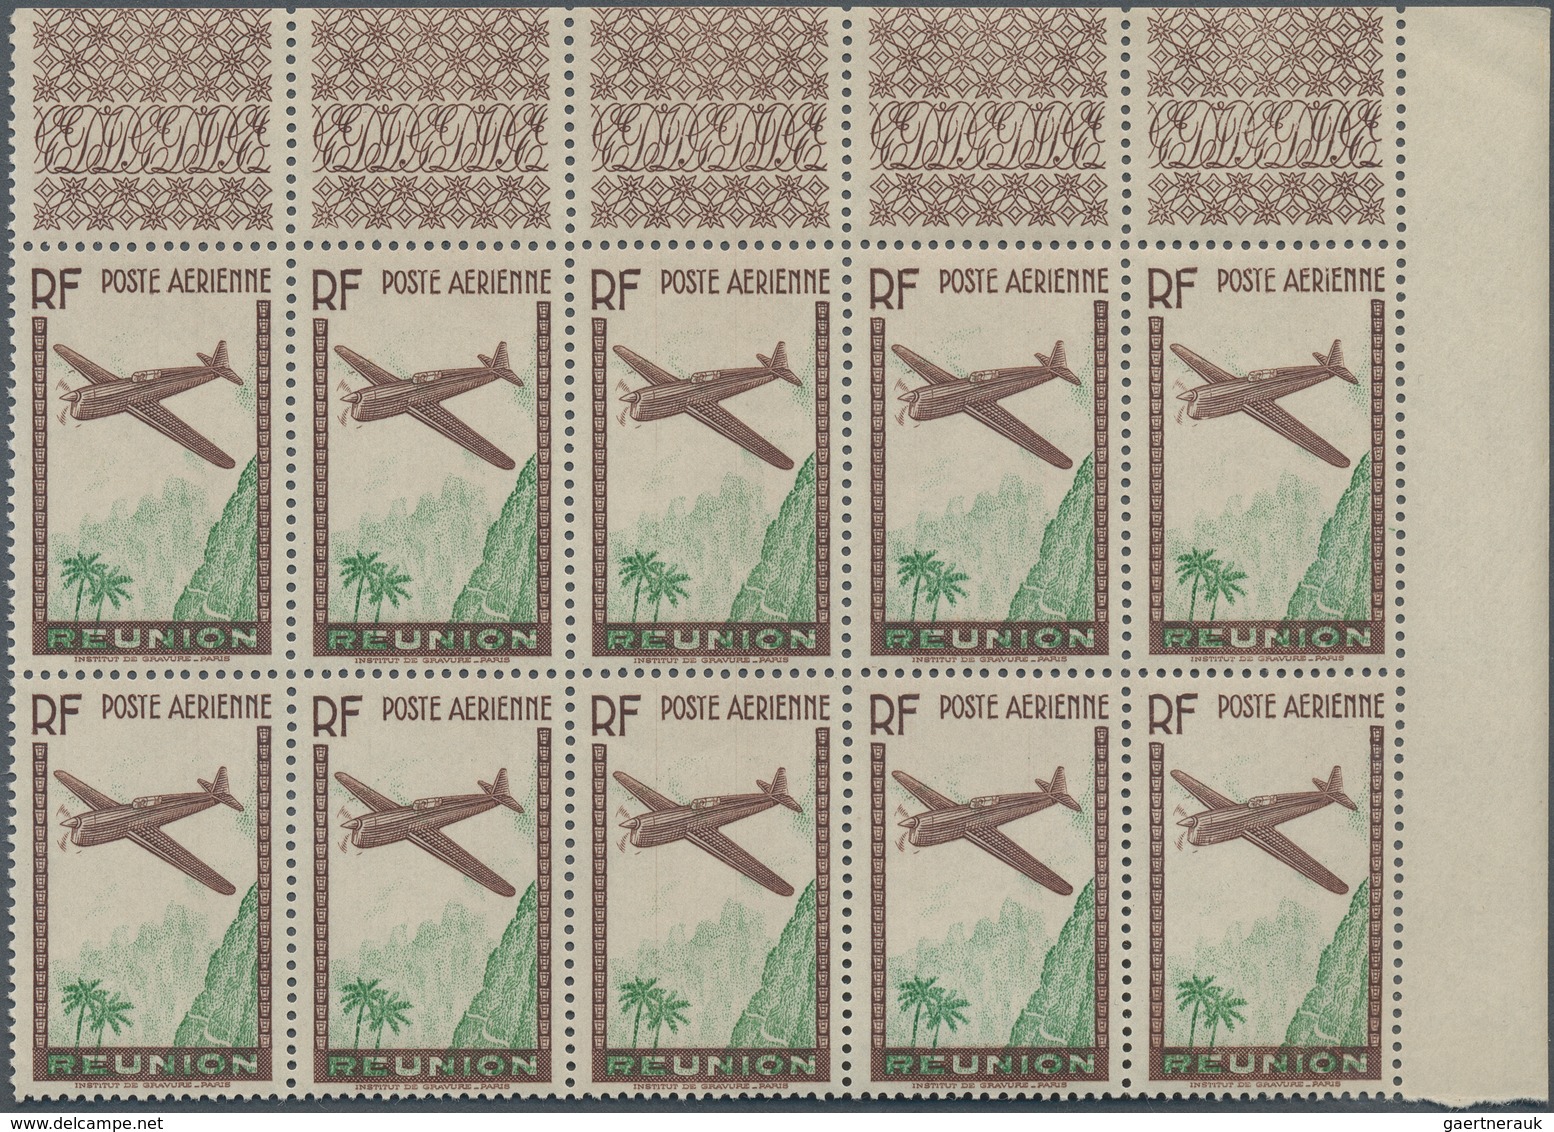 Reunion: 1938, Airmail Issue 'airplane Over Mountains' (12.65fr.) Brown/green With MISSING DENOMINAT - Usados